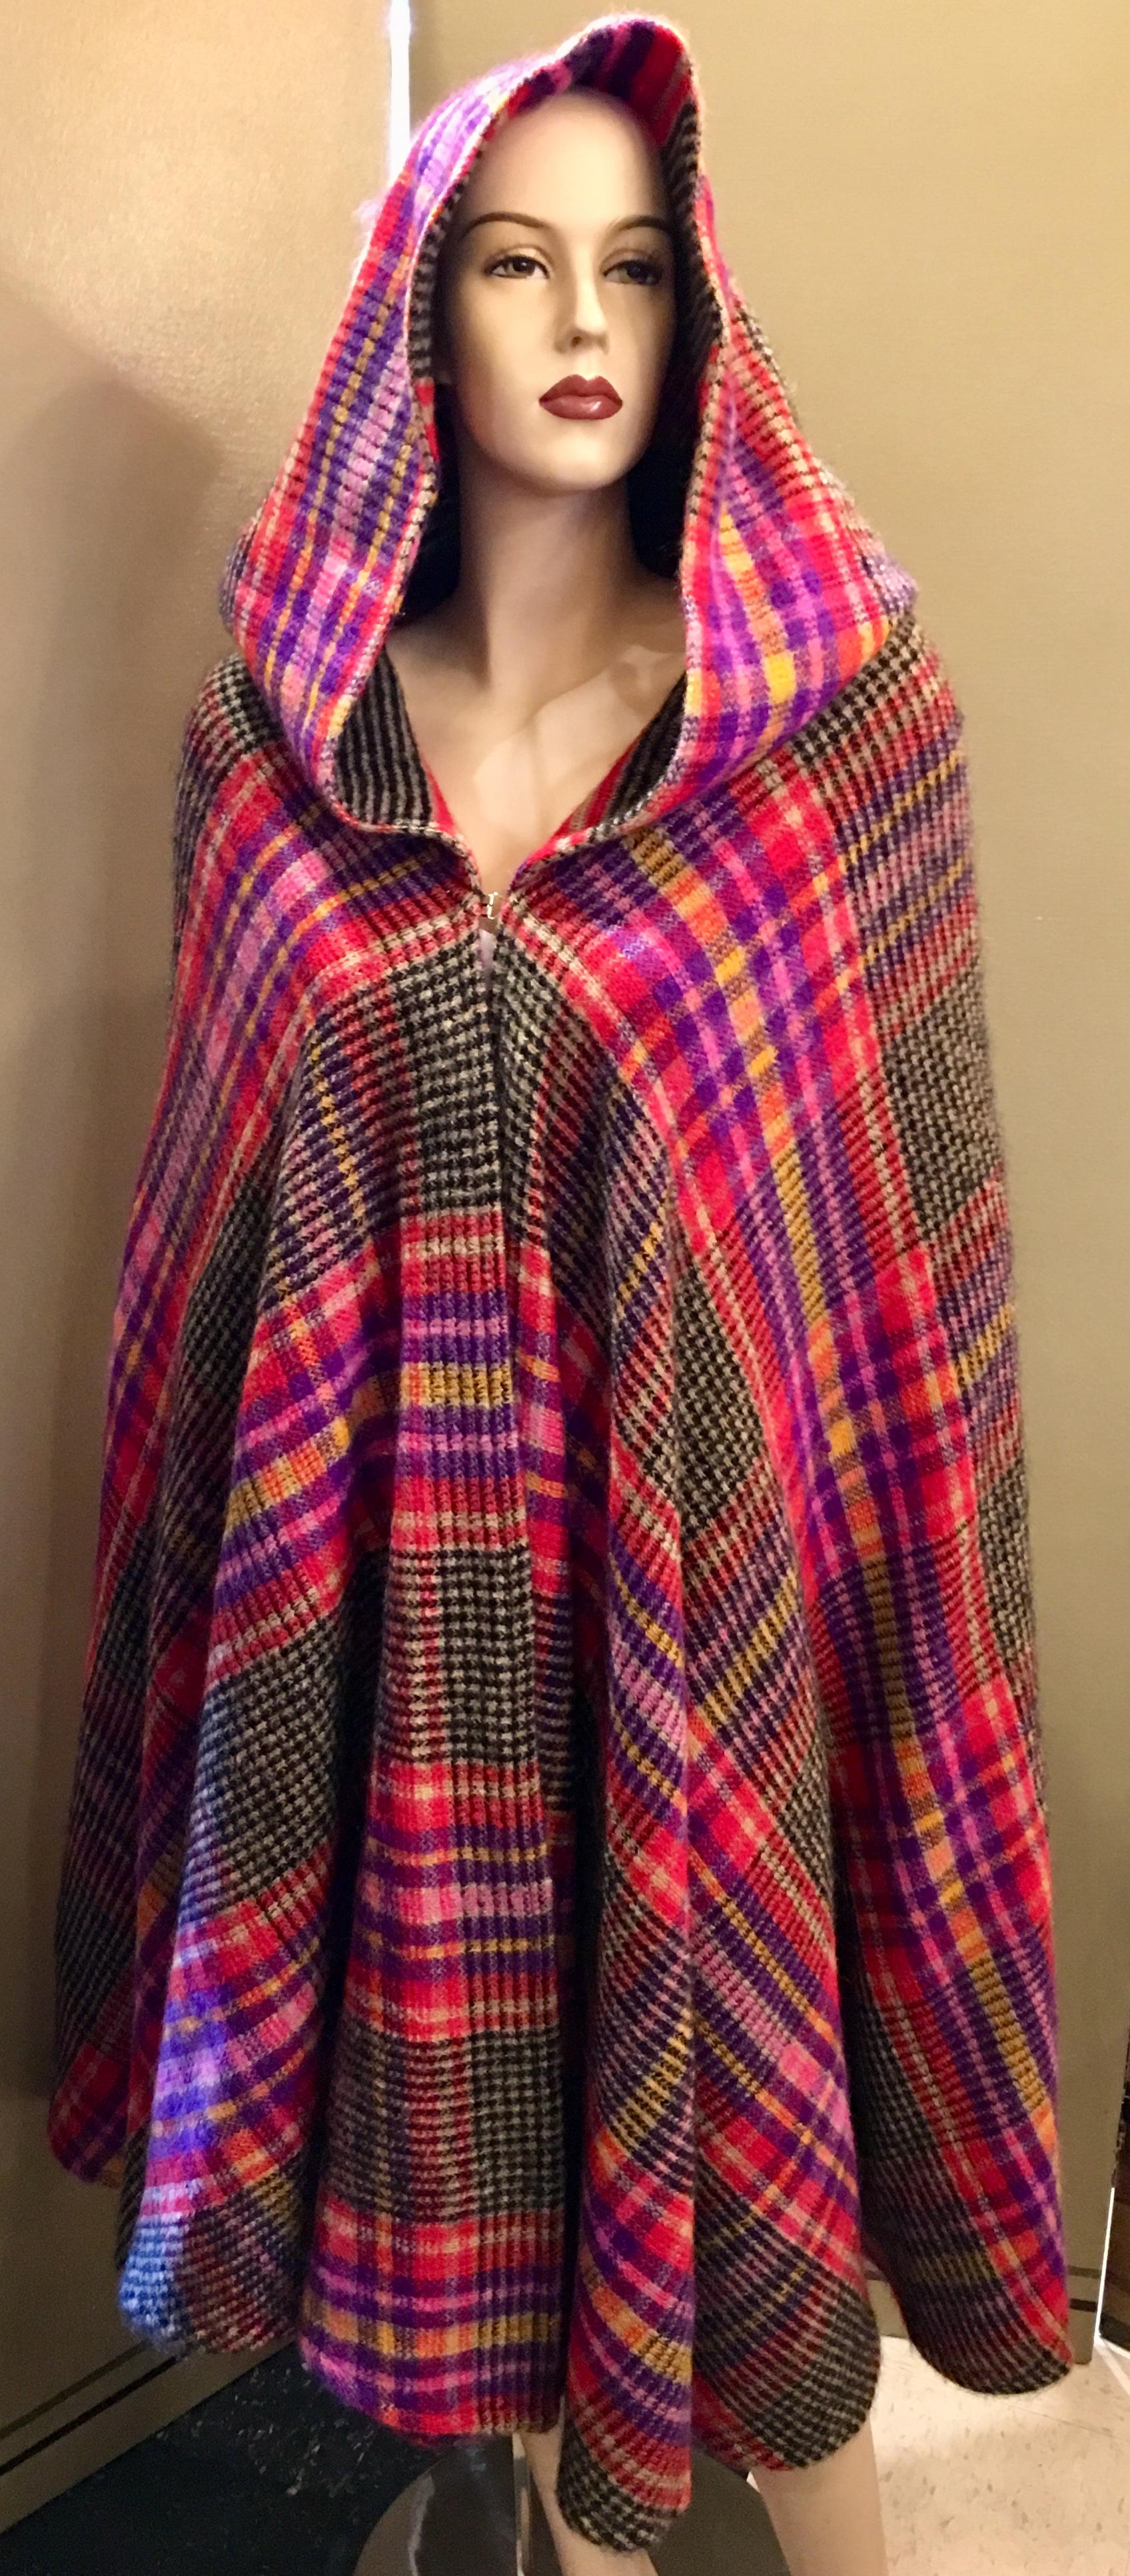 Colorful, heavy, knitted vintage mohair wool, plaid hooded cape from Italian high end, couture fashion designer, Missoni, features a complementary, color coordinated, striped interior and a rounded, circle hemline. Closes with a hook and eye at the